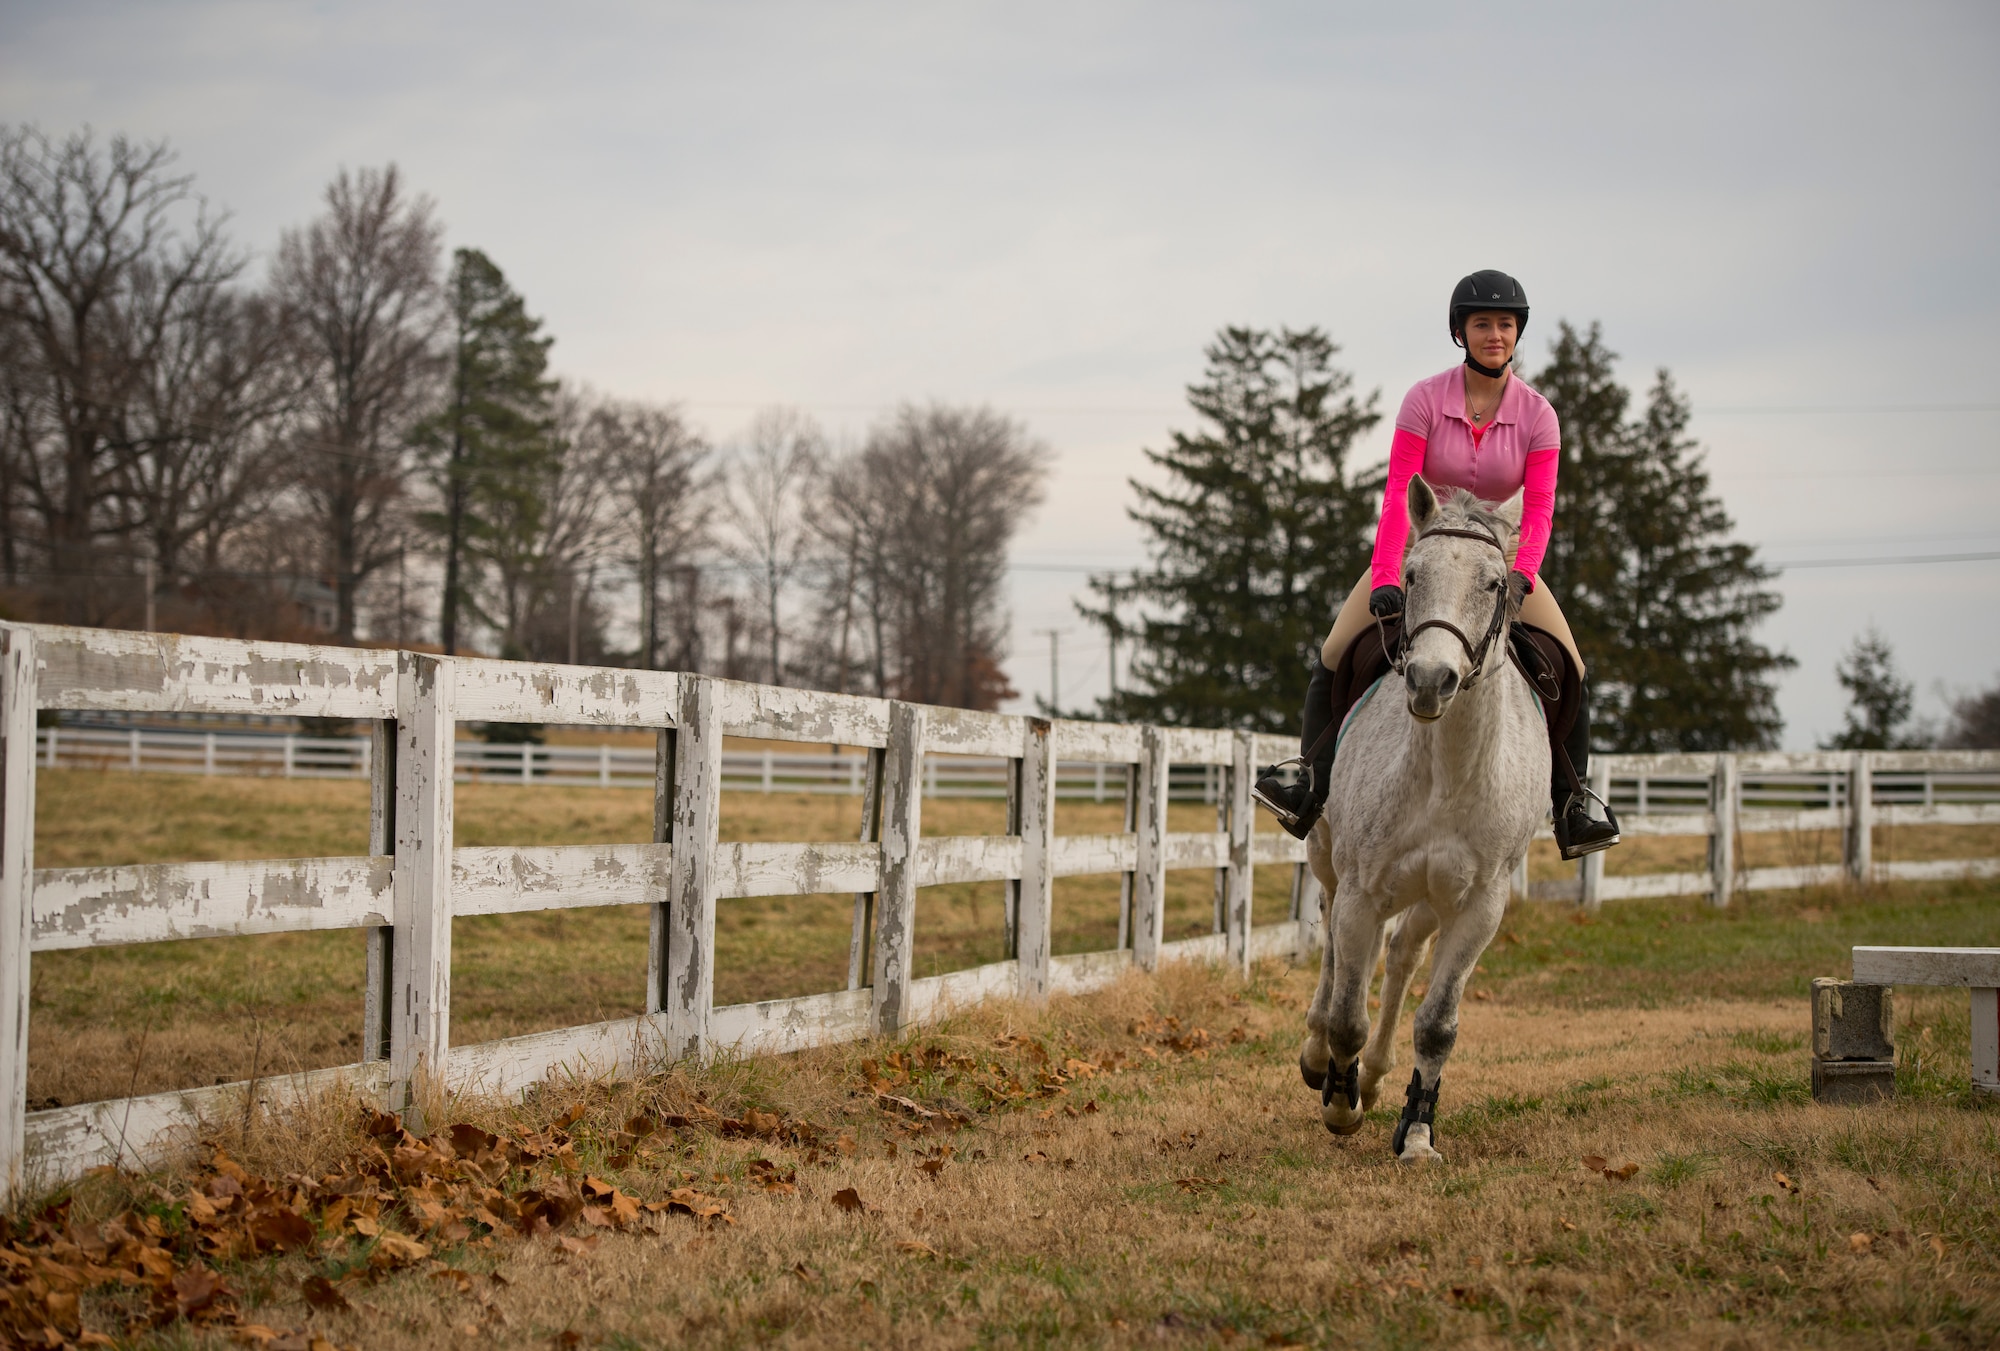 Airman 1st Class Kaitlyn Evans, an 11th Security Forces Squadron patrolman, rides her horse Kobalt in Lothian, Maryland. Evans, a North Carolina native, relocated her horse to Maryland at her own expense to continue competing with the horse. Spending about two hours of time with her horse has helped Evans cope physically and mentally as she begins her military career. (U.S. Air Force photo/Staff Sgt. Vernon Young Jr.)